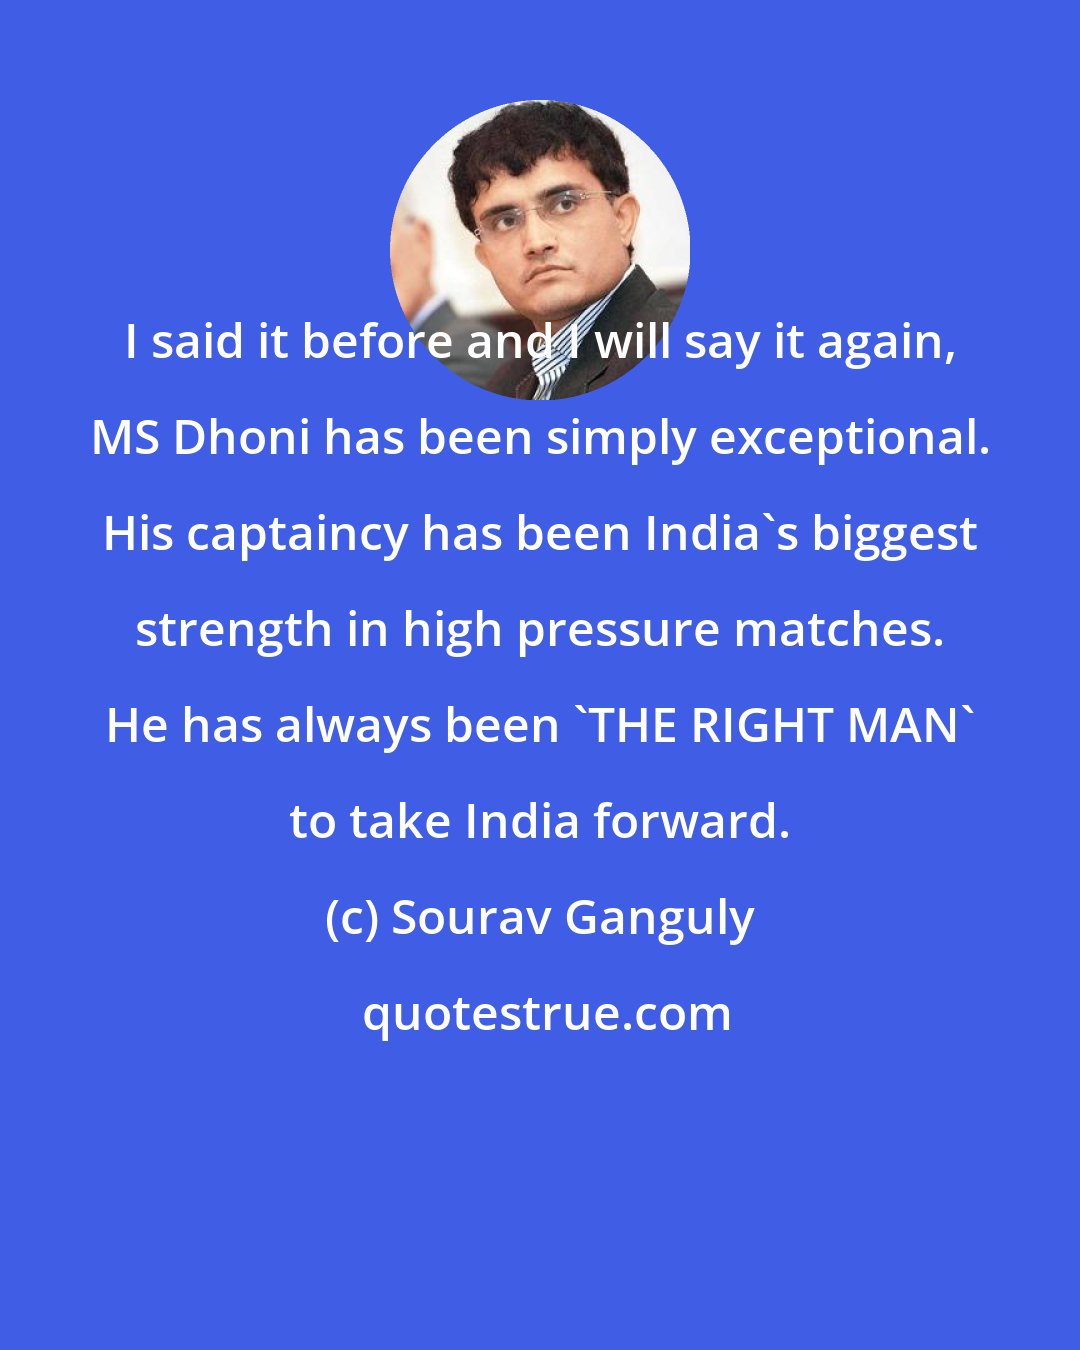 Sourav Ganguly: I said it before and I will say it again, MS Dhoni has been simply exceptional. His captaincy has been India's biggest strength in high pressure matches. He has always been 'THE RIGHT MAN' to take India forward.